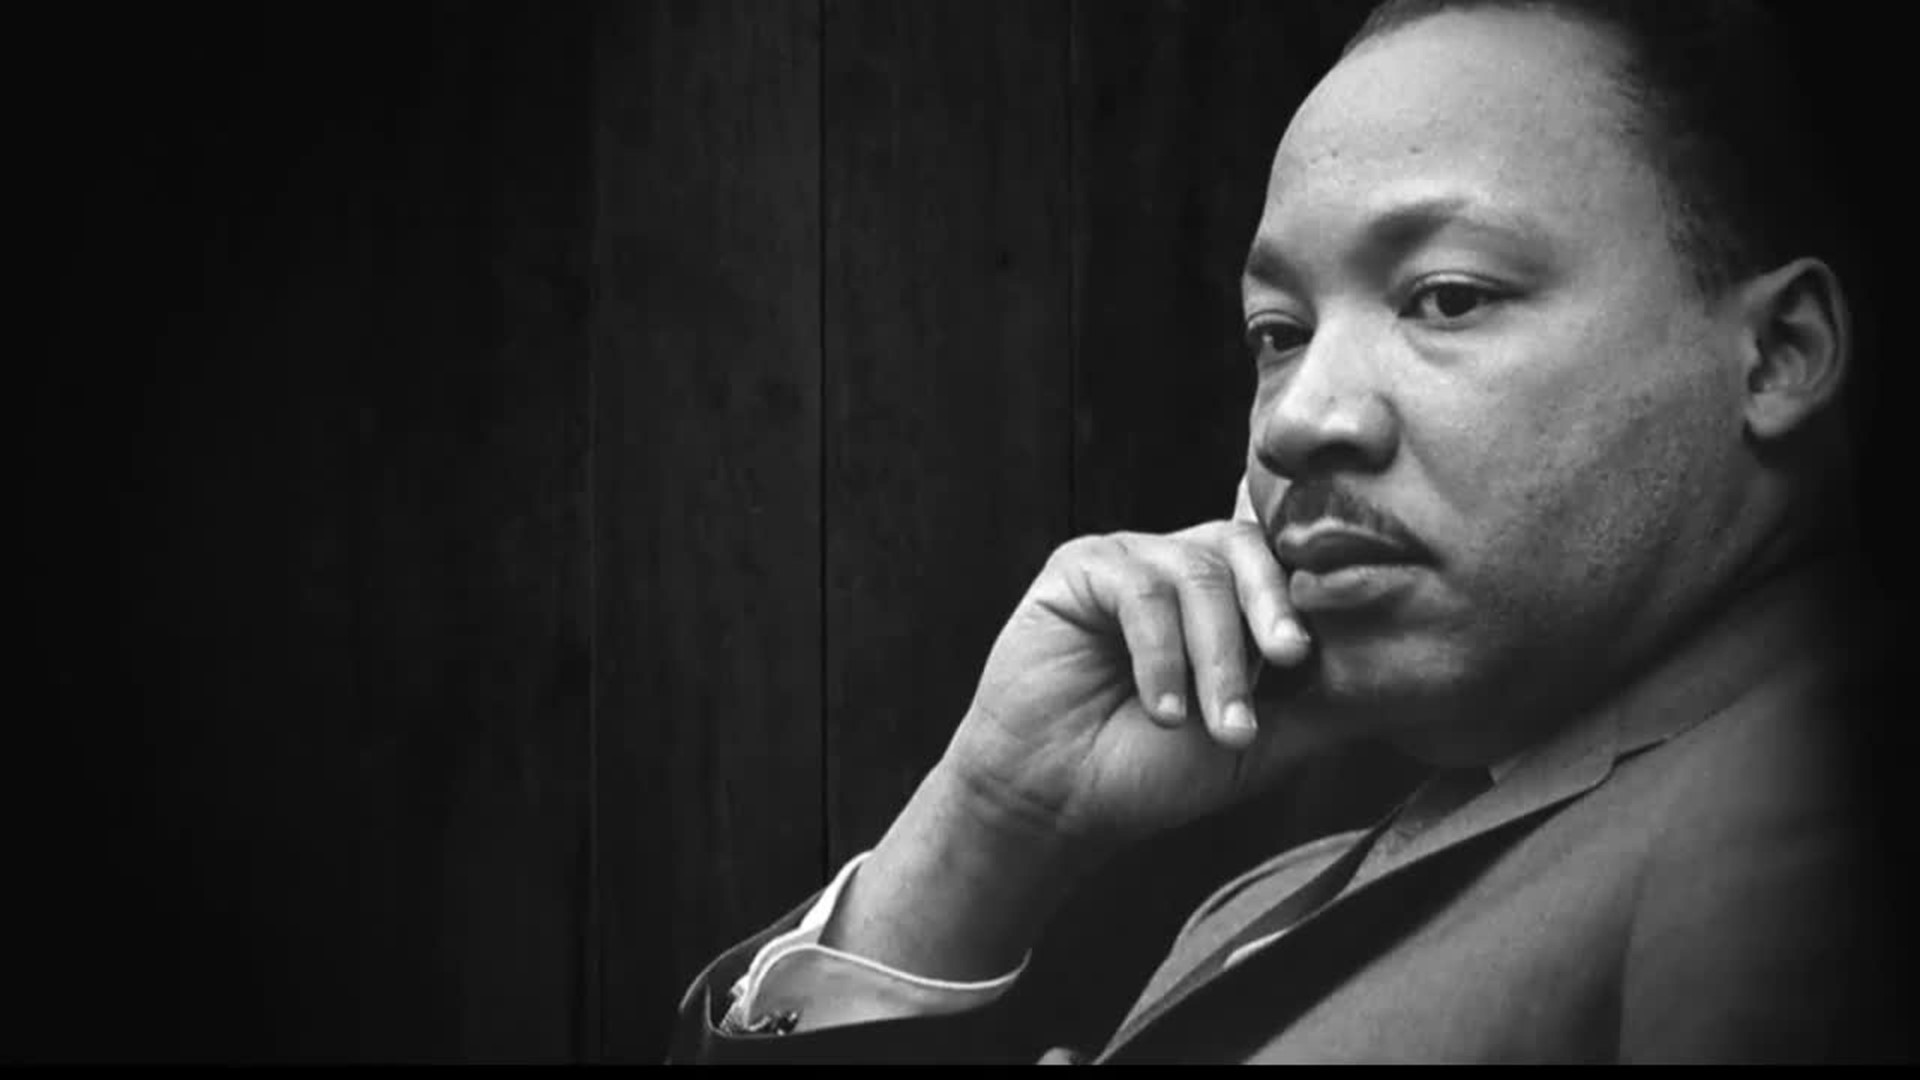 Several places will be holding events on MLK Day and the days leading up to it.